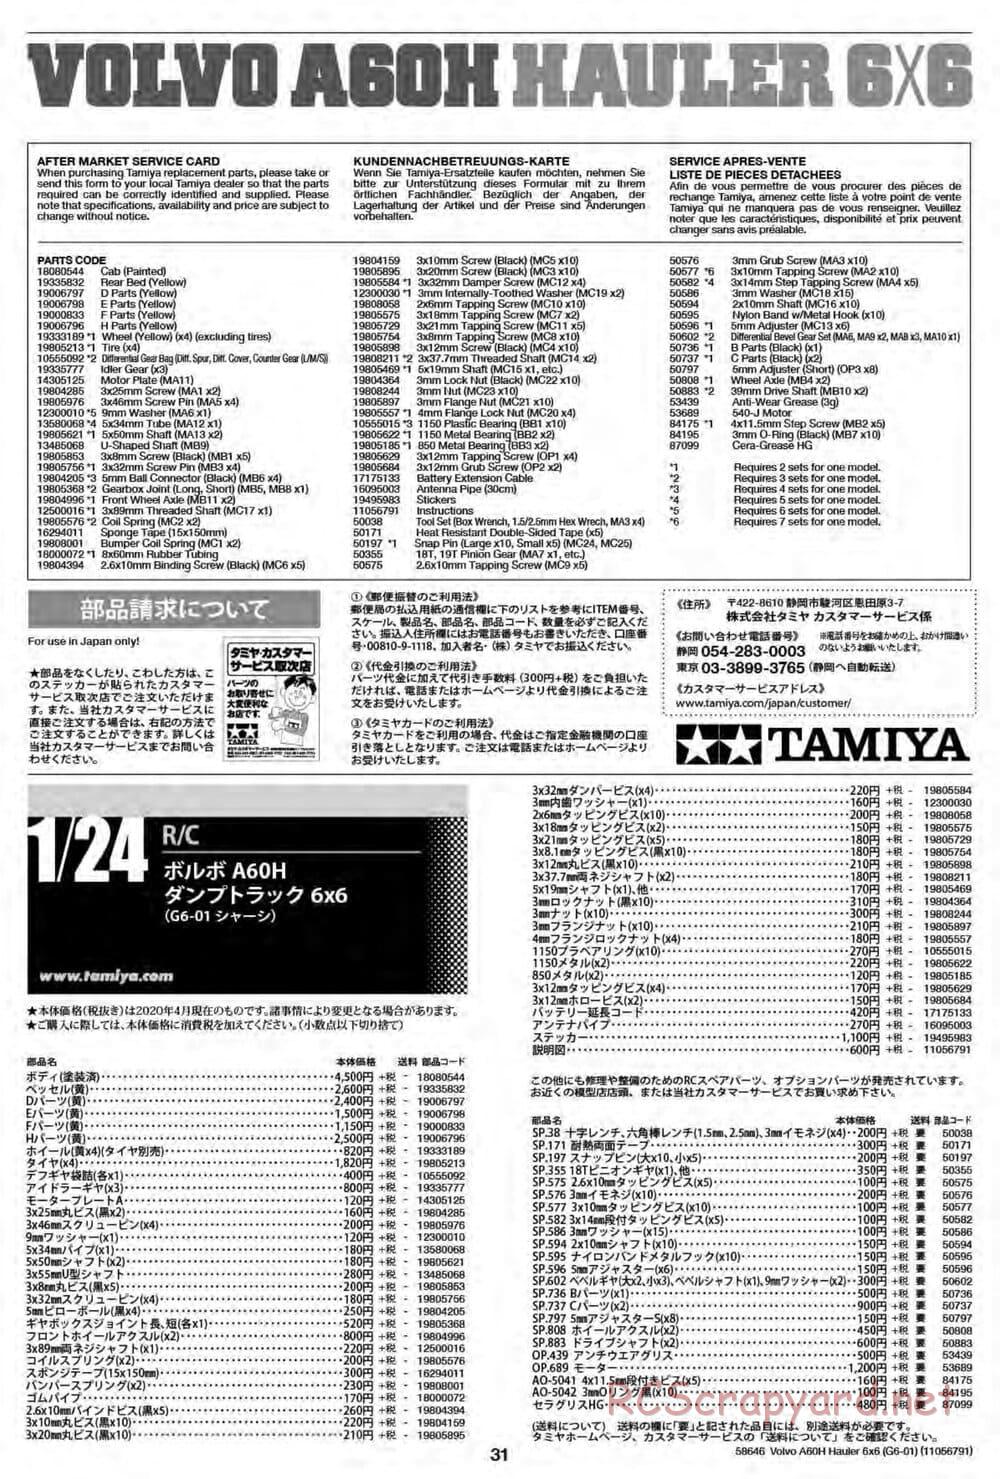 Tamiya - Volvo A60H Dump Truck 6x6 - G6-01 Chassis - Manual - Page 30